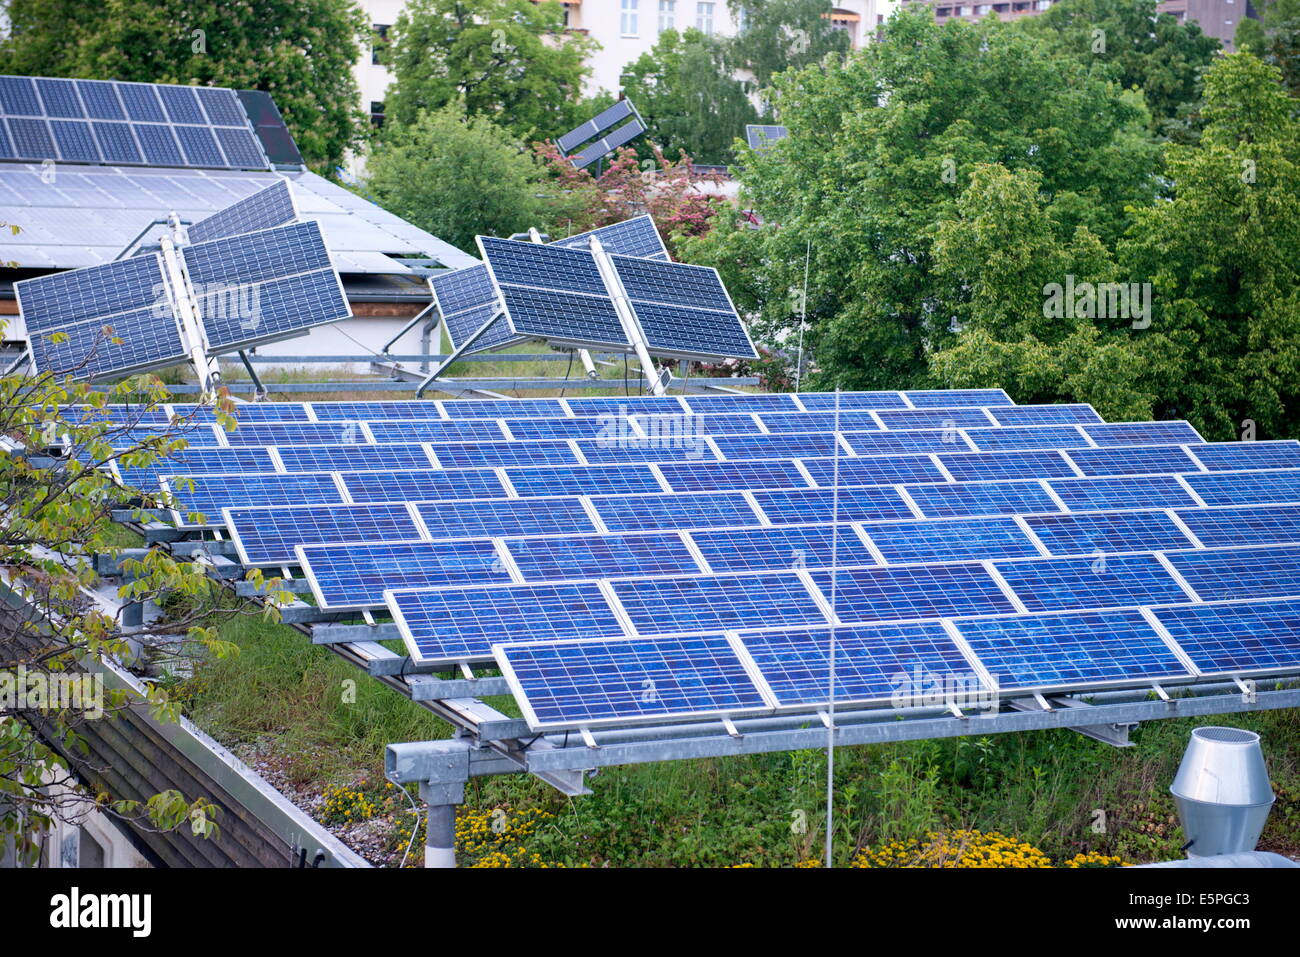 One of the first combined photovoltaic/solar panelled and green roofs built in the world, Berlin, Germany Stock Photo